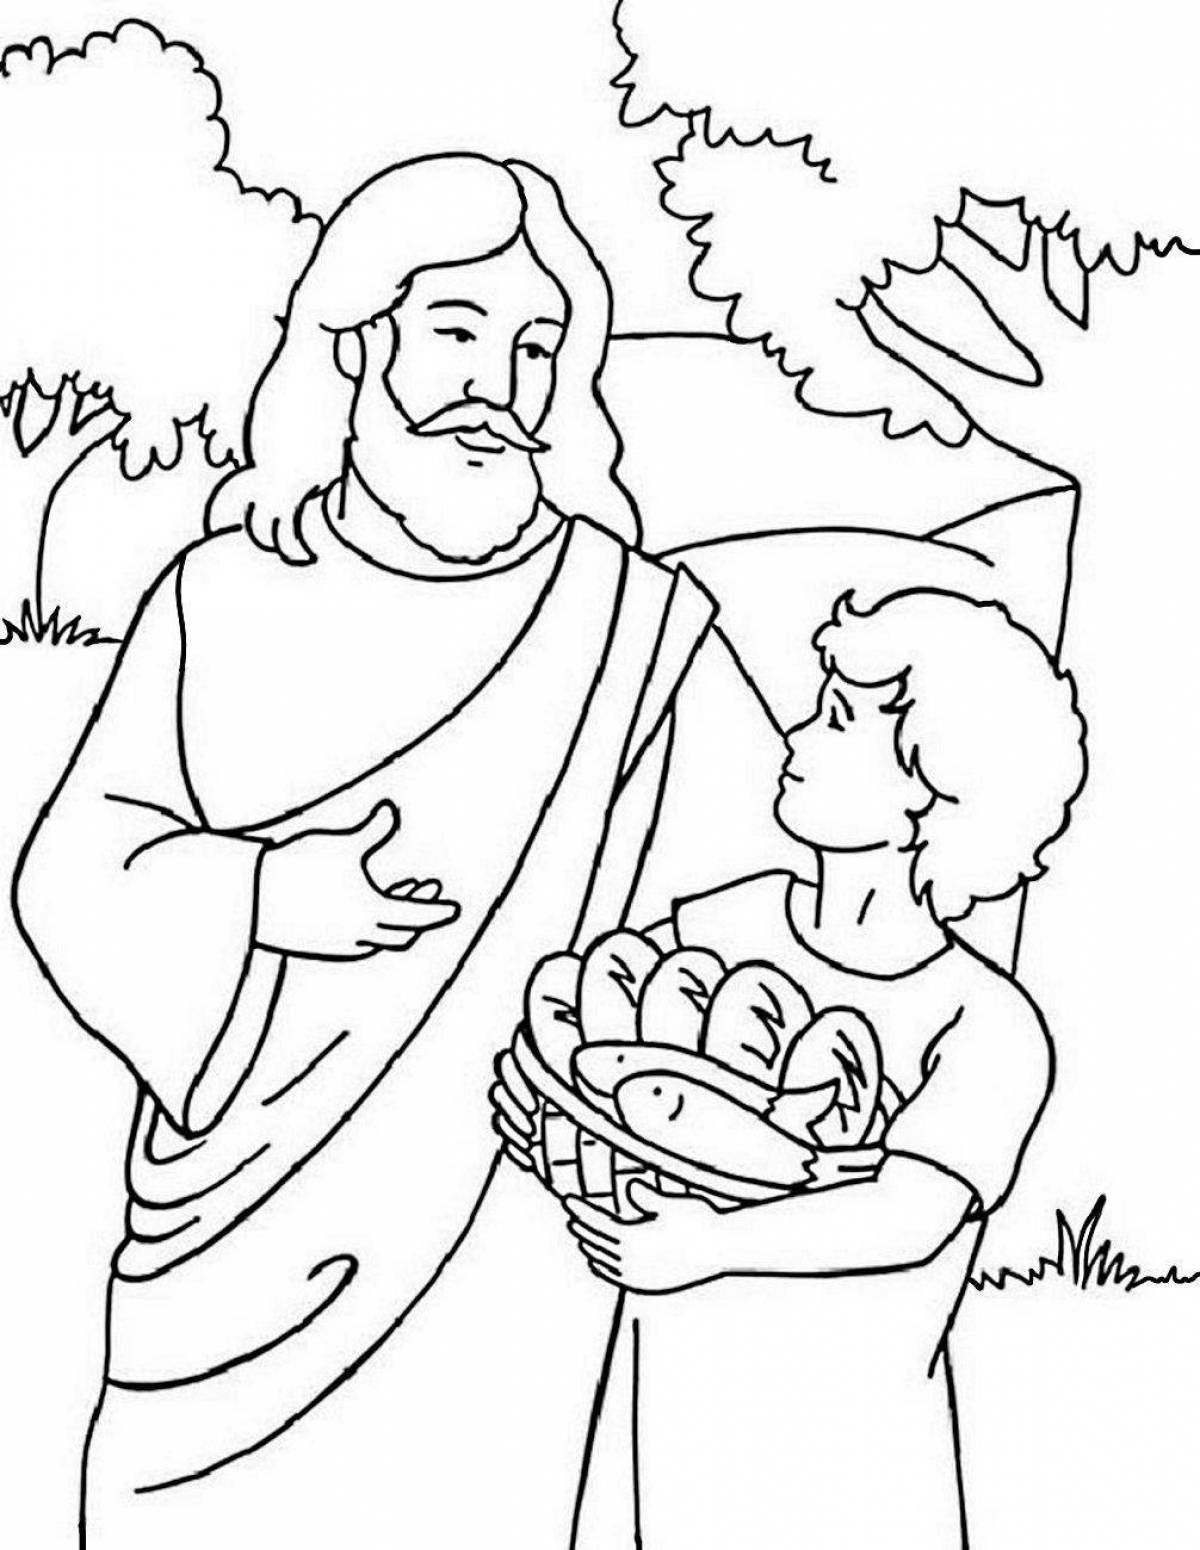 Playful jesus coloring page for kids